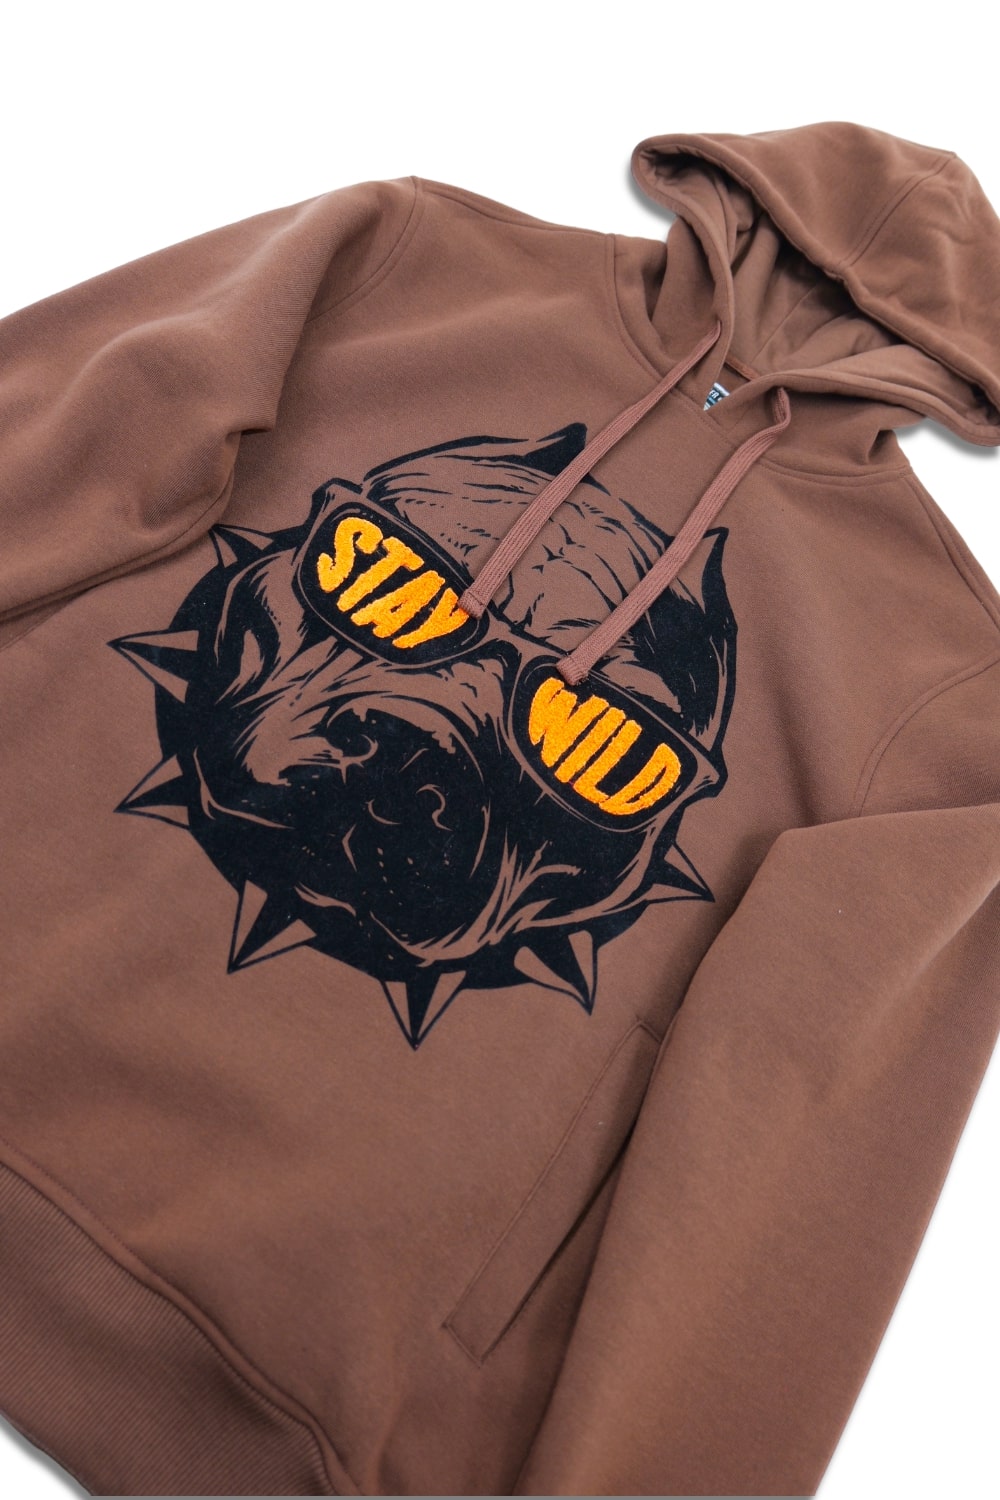 Graphic Hoodies - Stay Wild